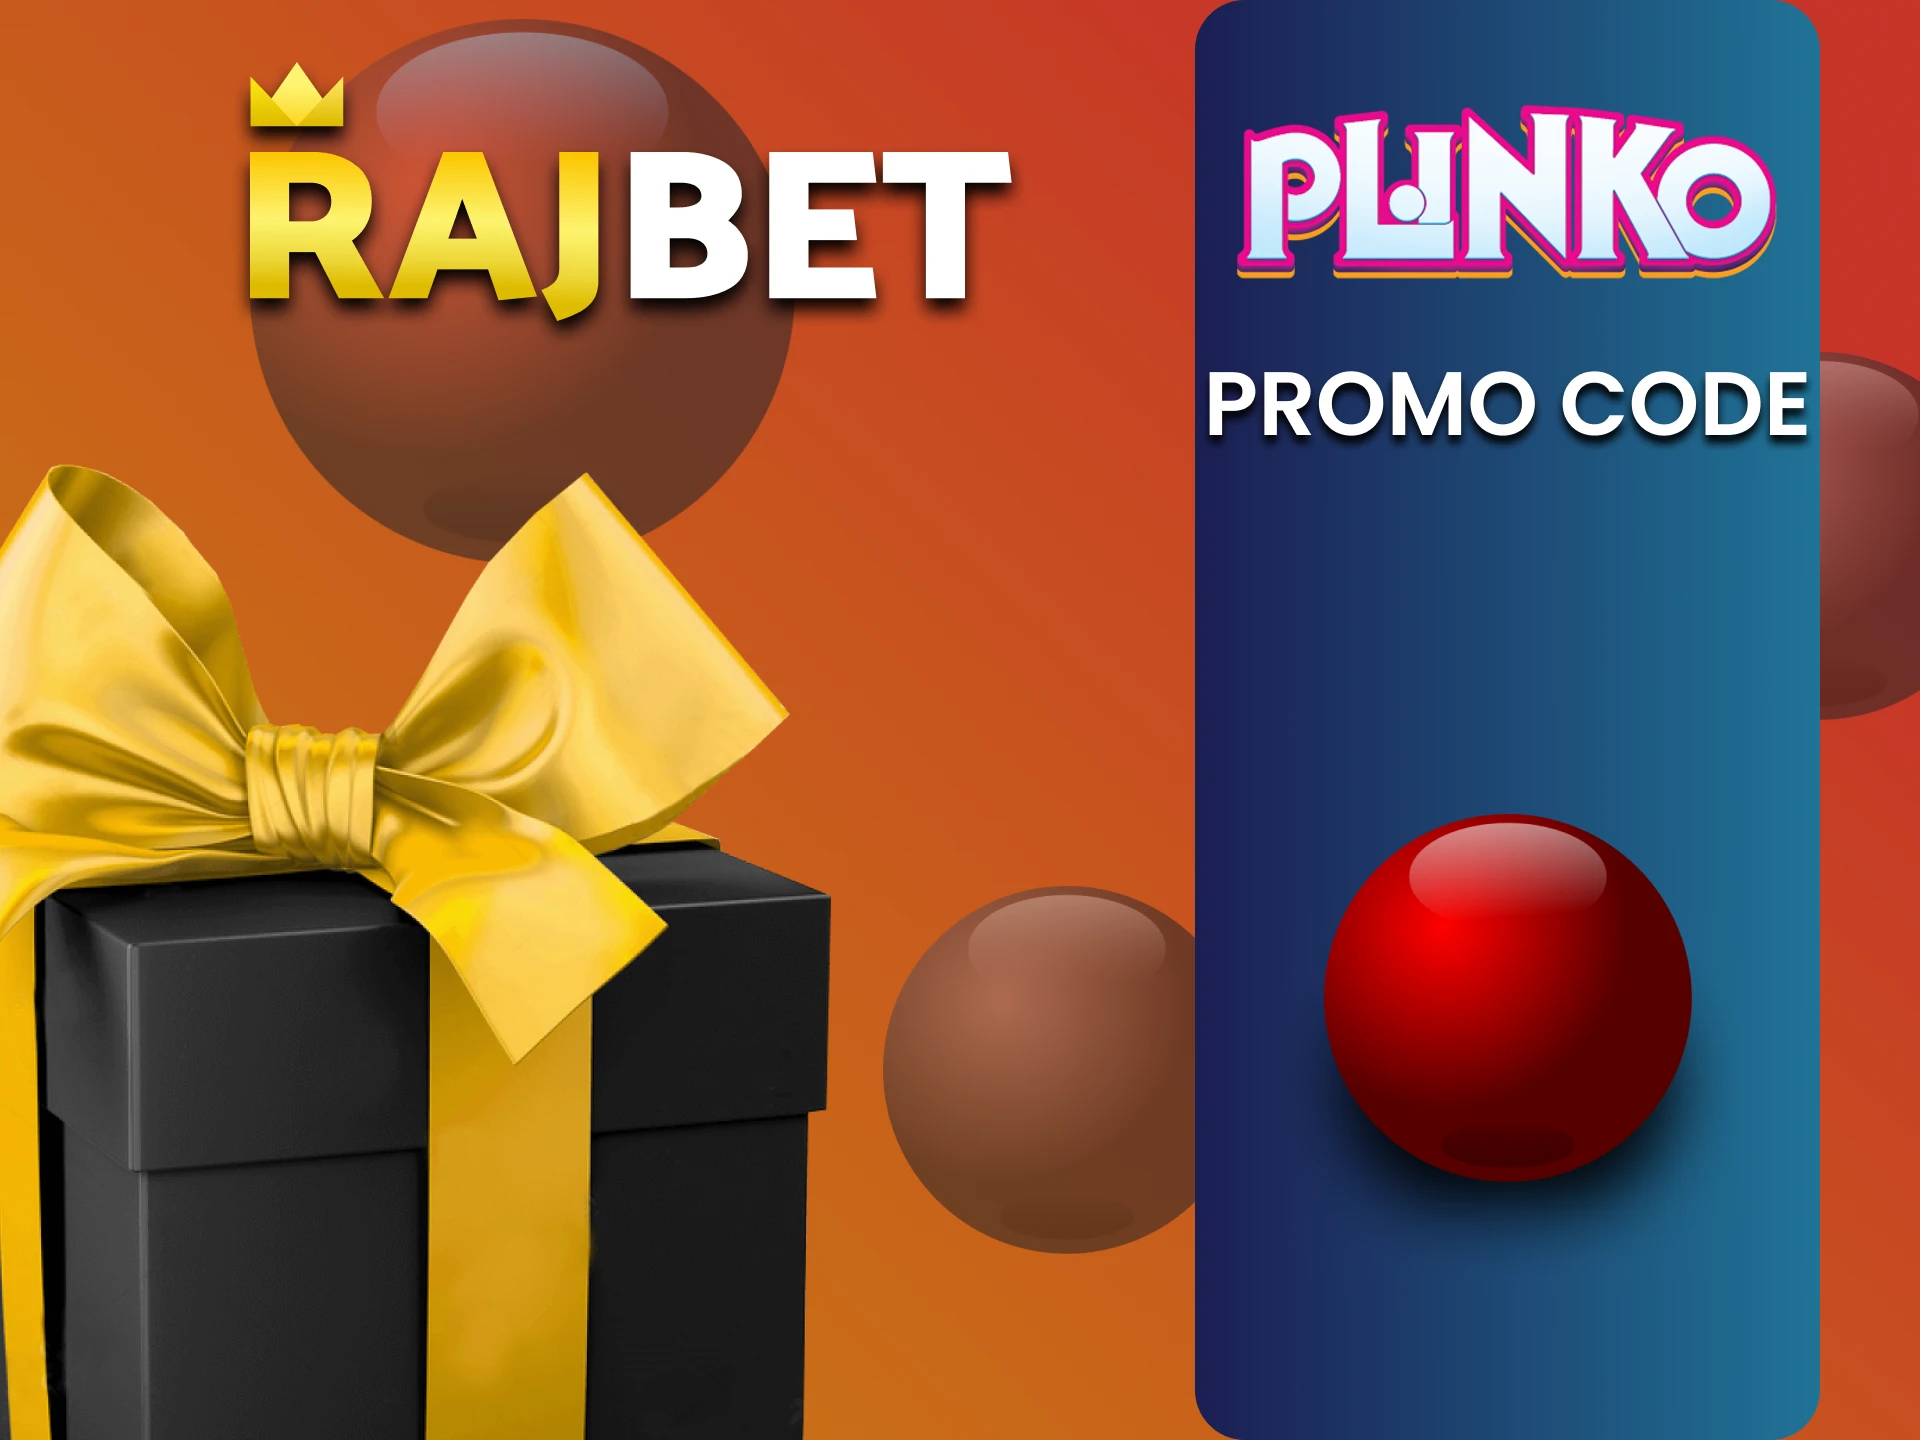 Get a promo code from Rajbet for Plinko.